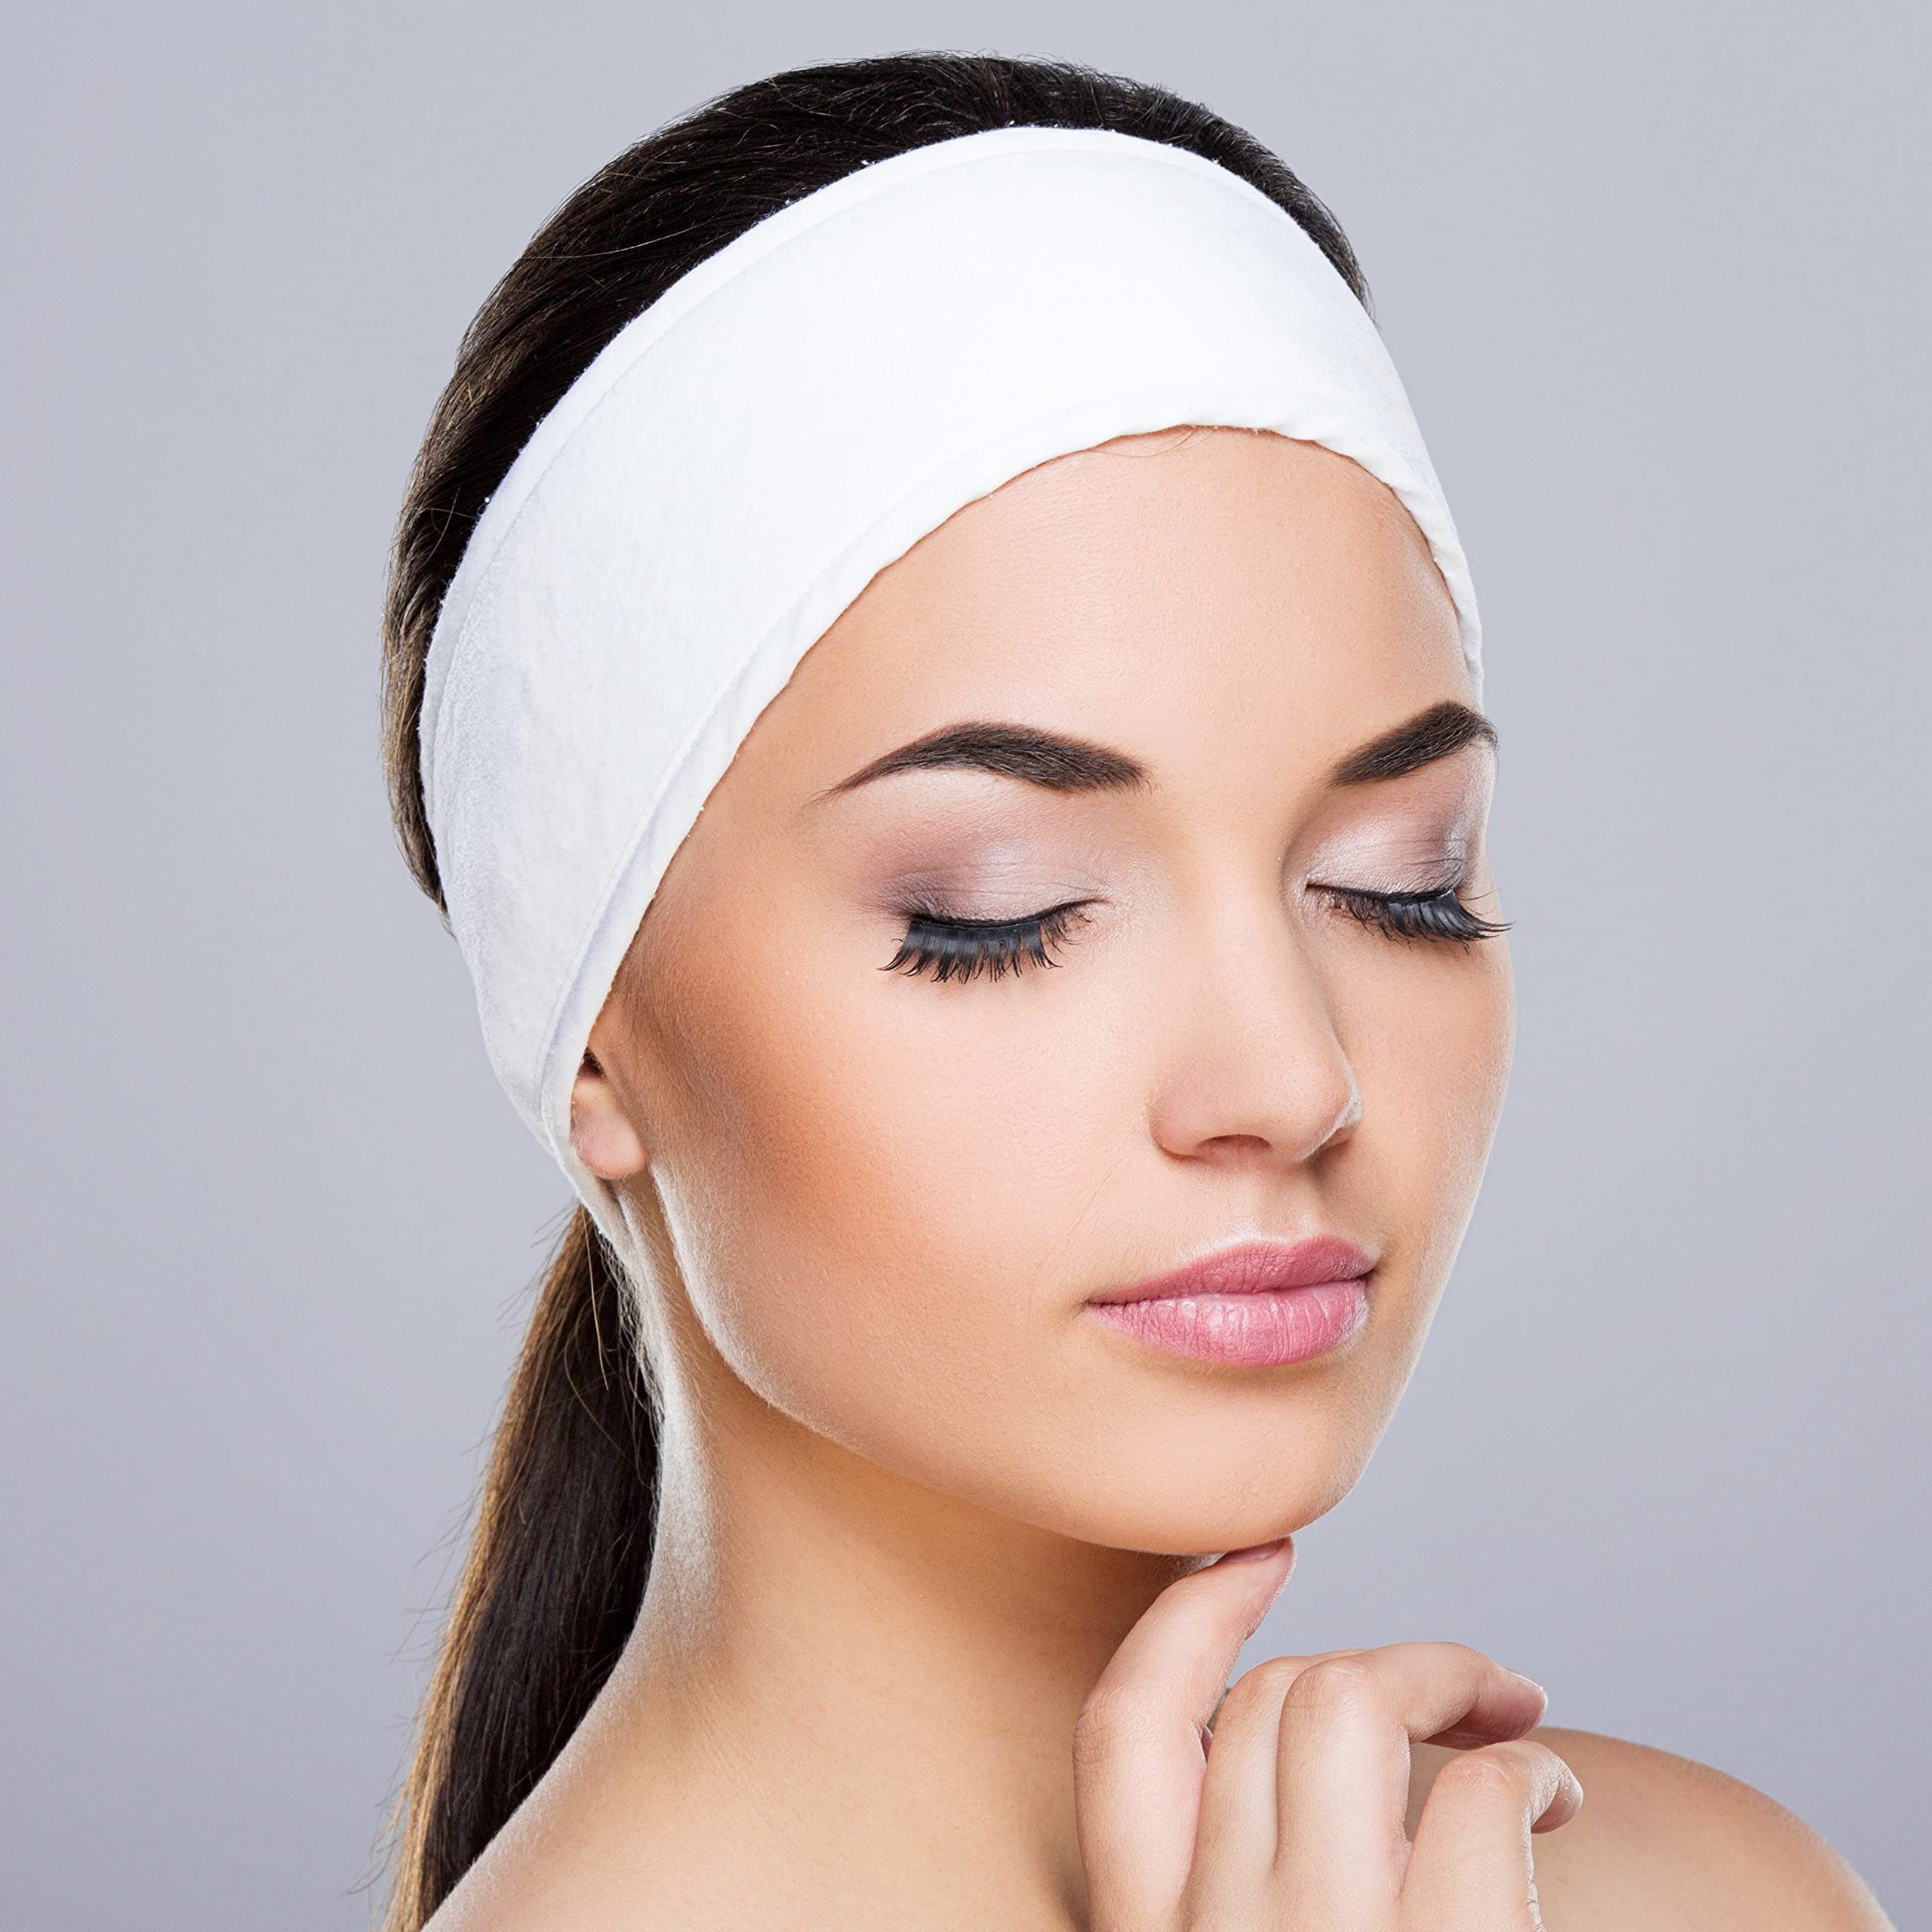 Terry Vous Headband for - Cloth Hairbands Belle Makeup, - Headband Haarband Hairbands Cloth White White Terry 10 10